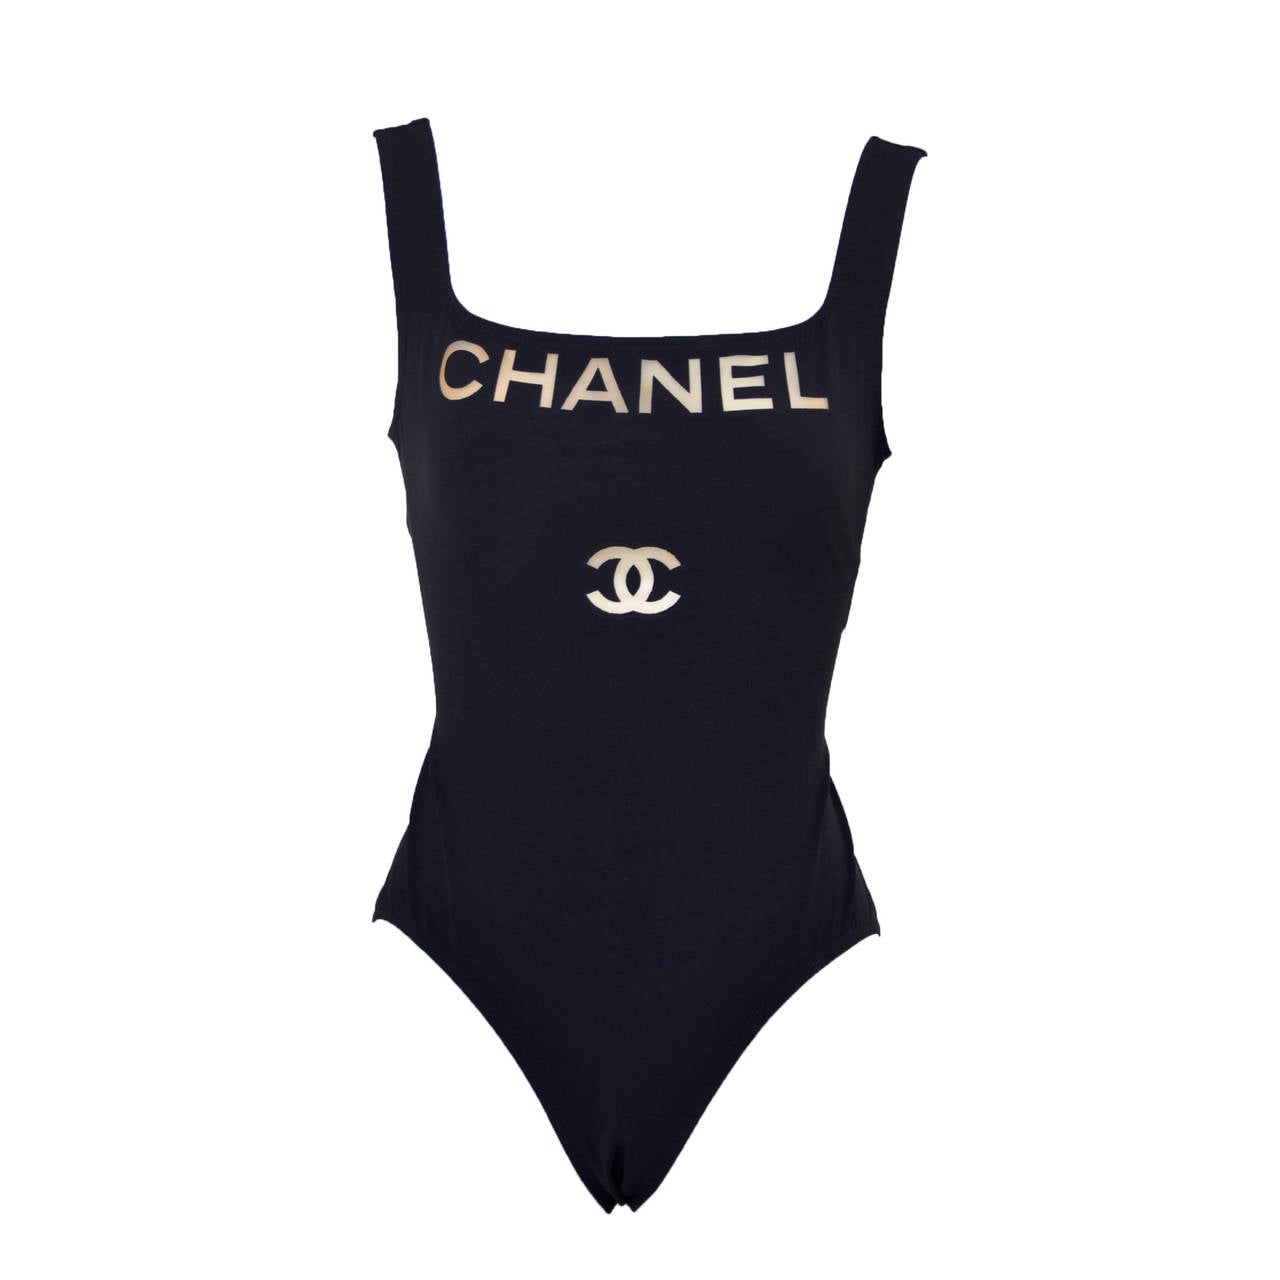 Chanel Black and Clear Logo One Piece Bathing Suit 01P Size 38 NEW